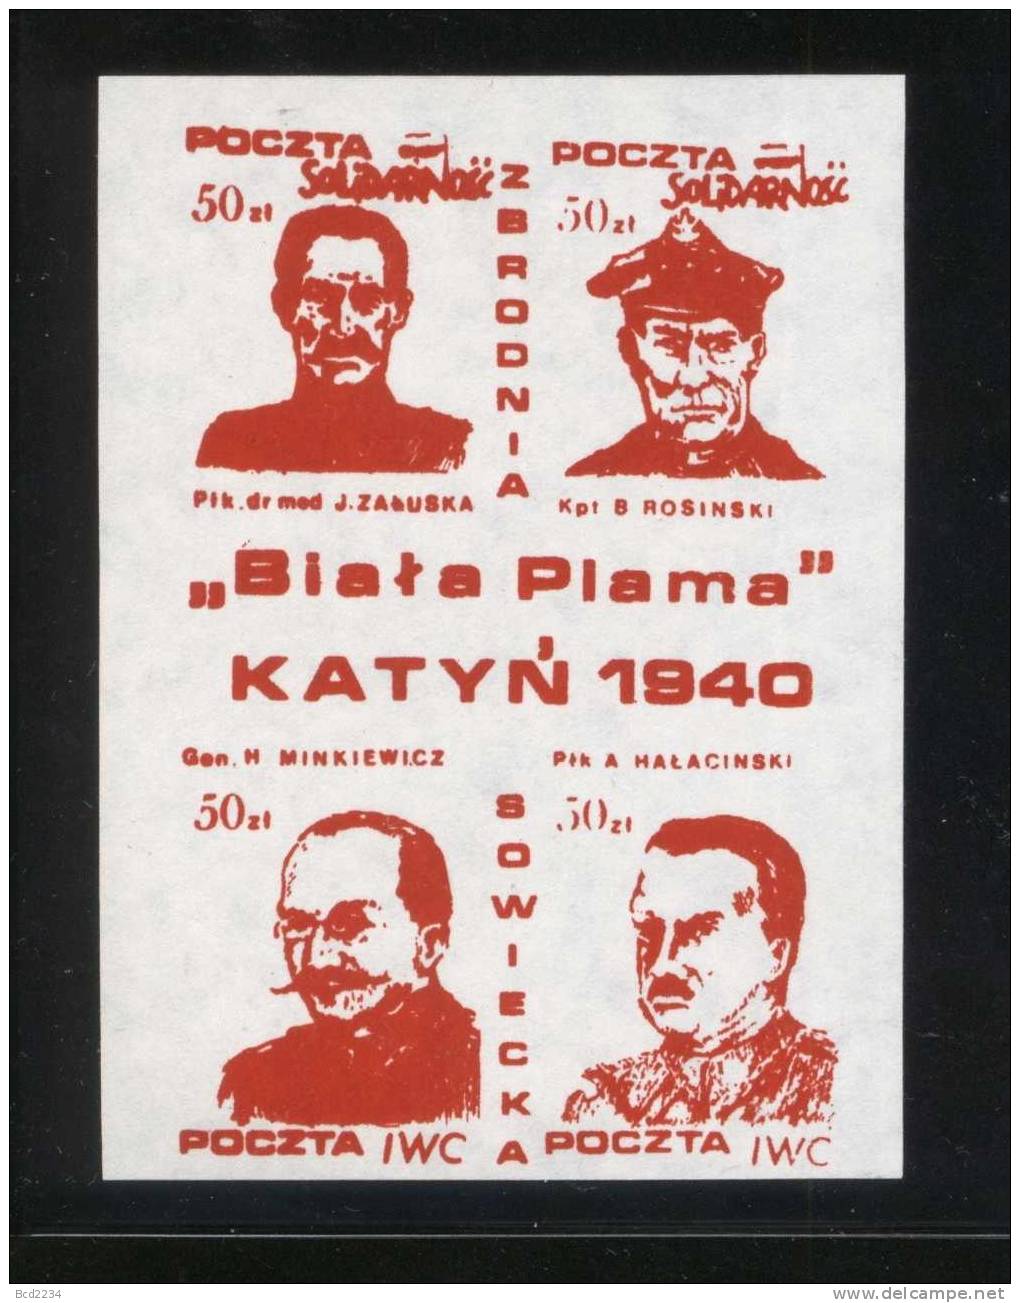 POLAND SOLIDARNOSC (POCZTA IWC) KATYN WHITE STAIN 1940 SPECIALISED COLLECTION  (SOLID0070/0211)) - Solidarnosc Labels